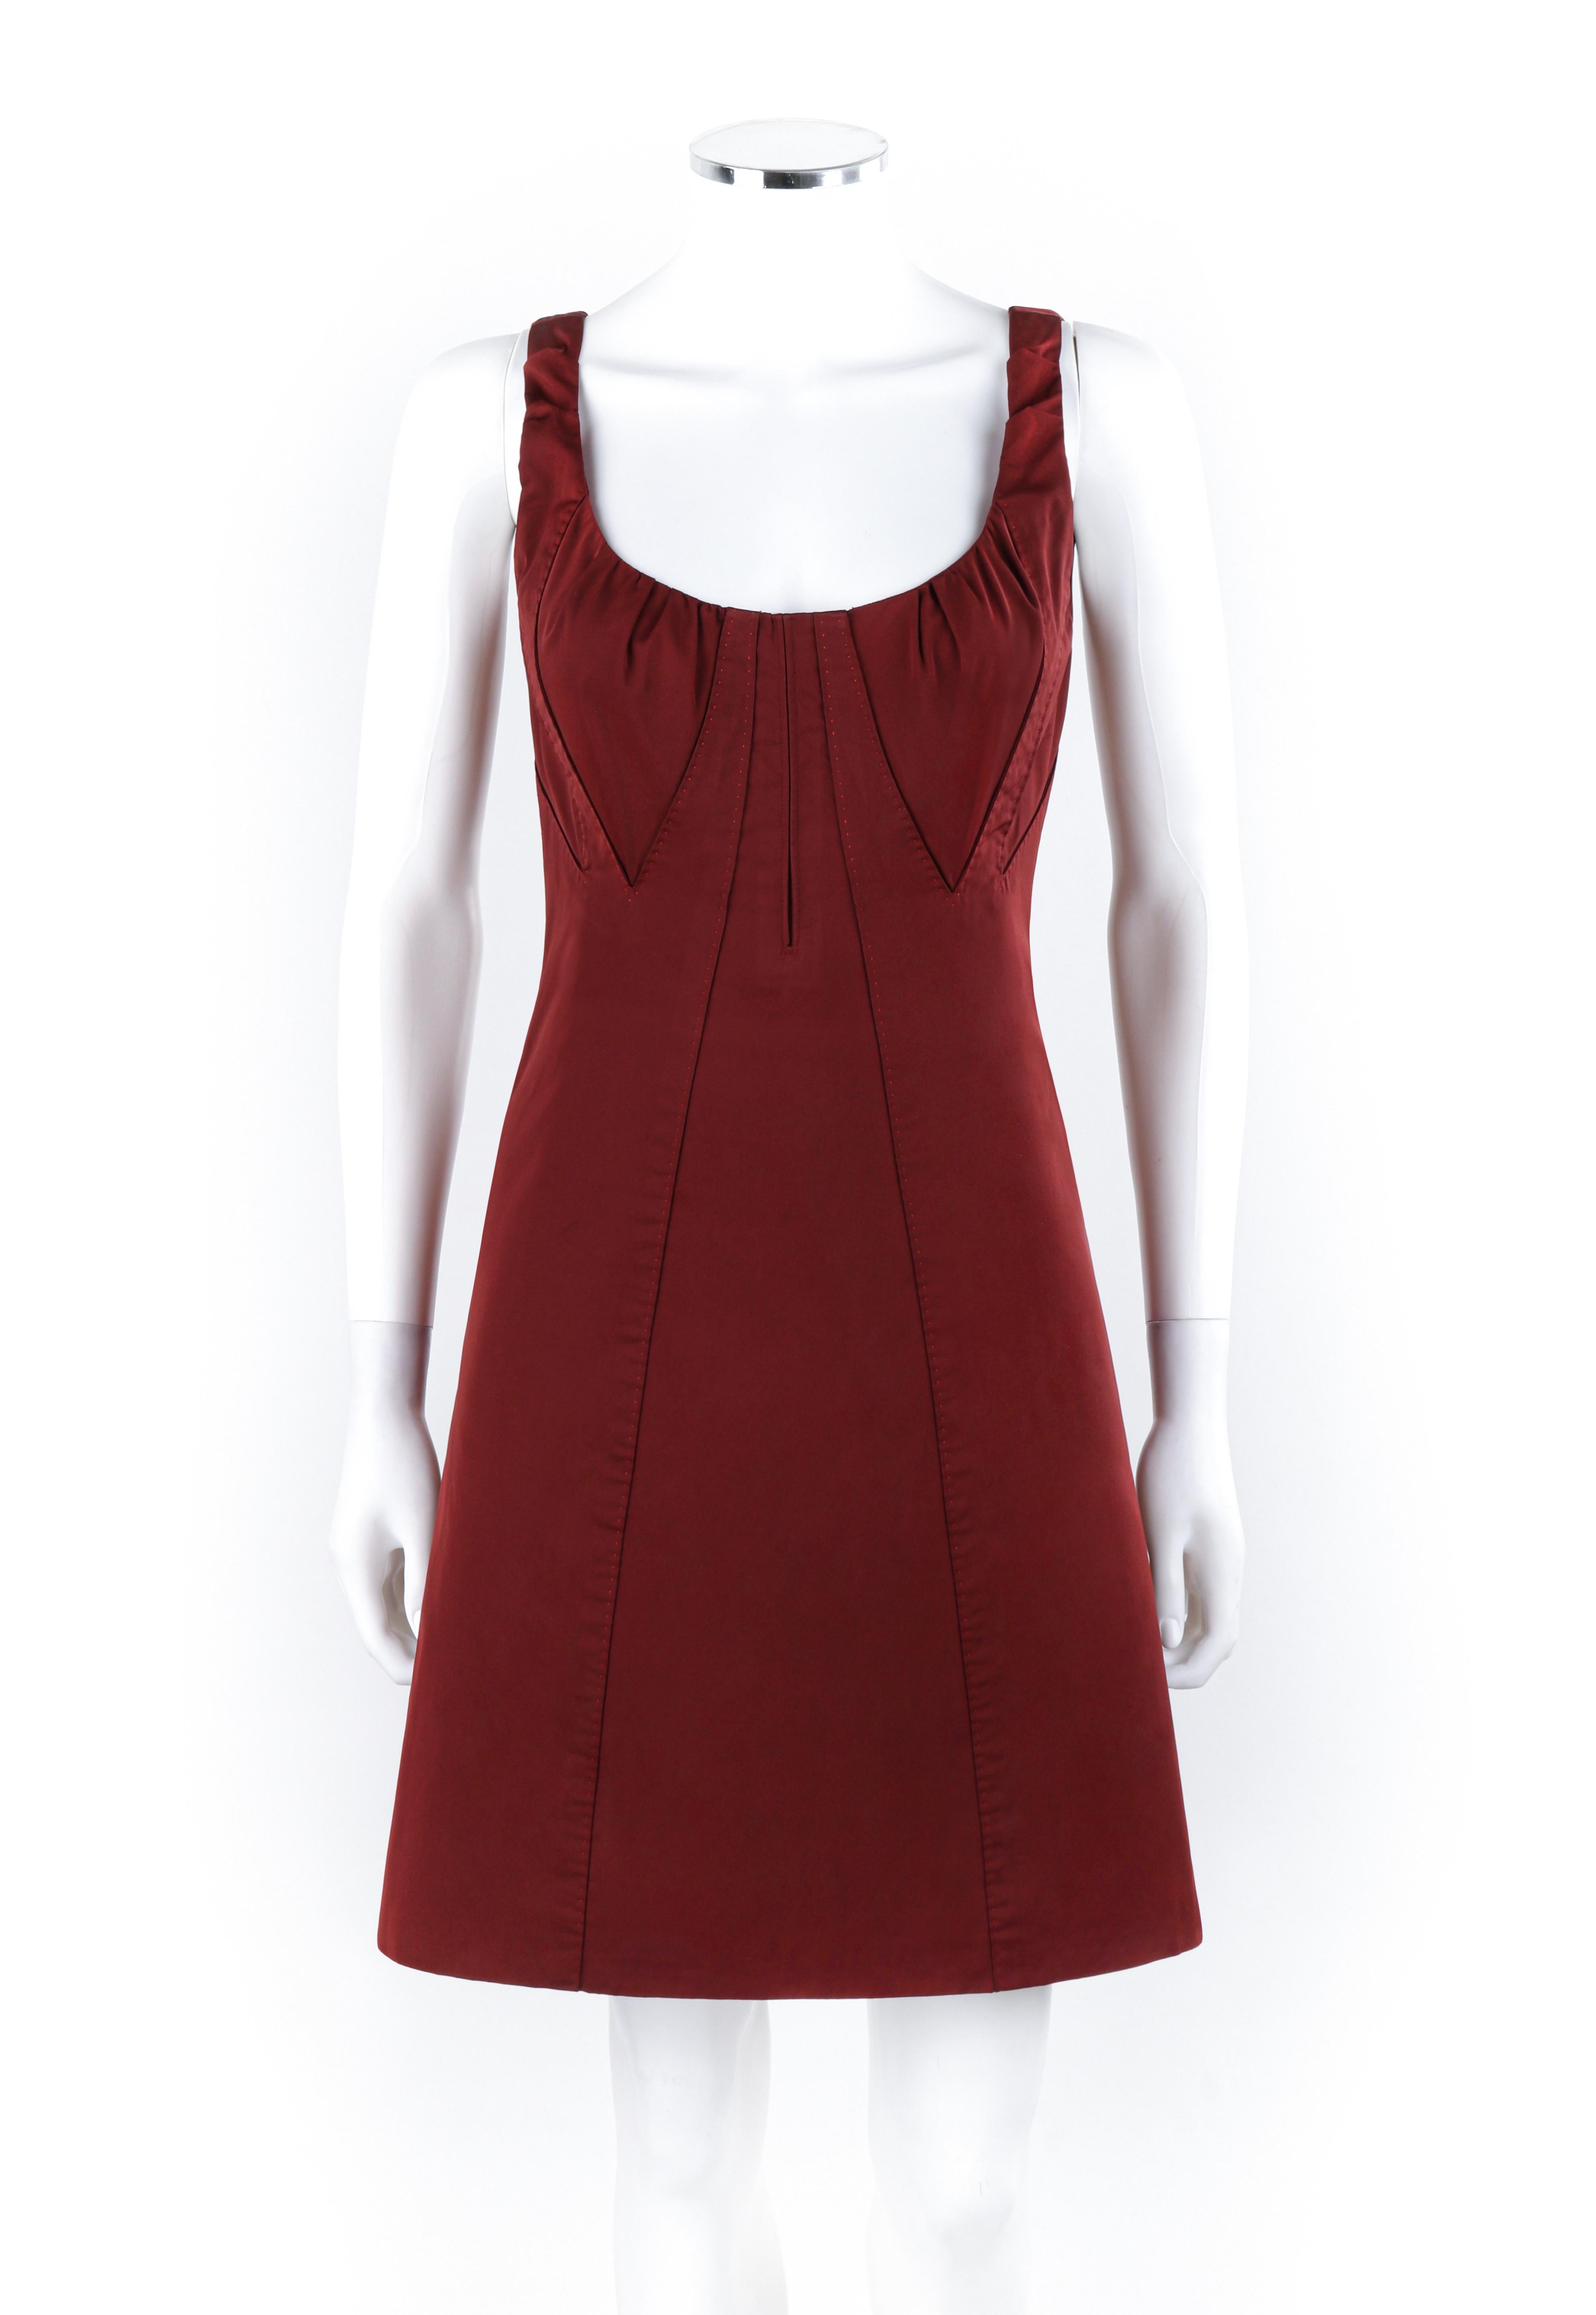 Louis Vuitton Red Dress - 14 For Sale on 1stDibs